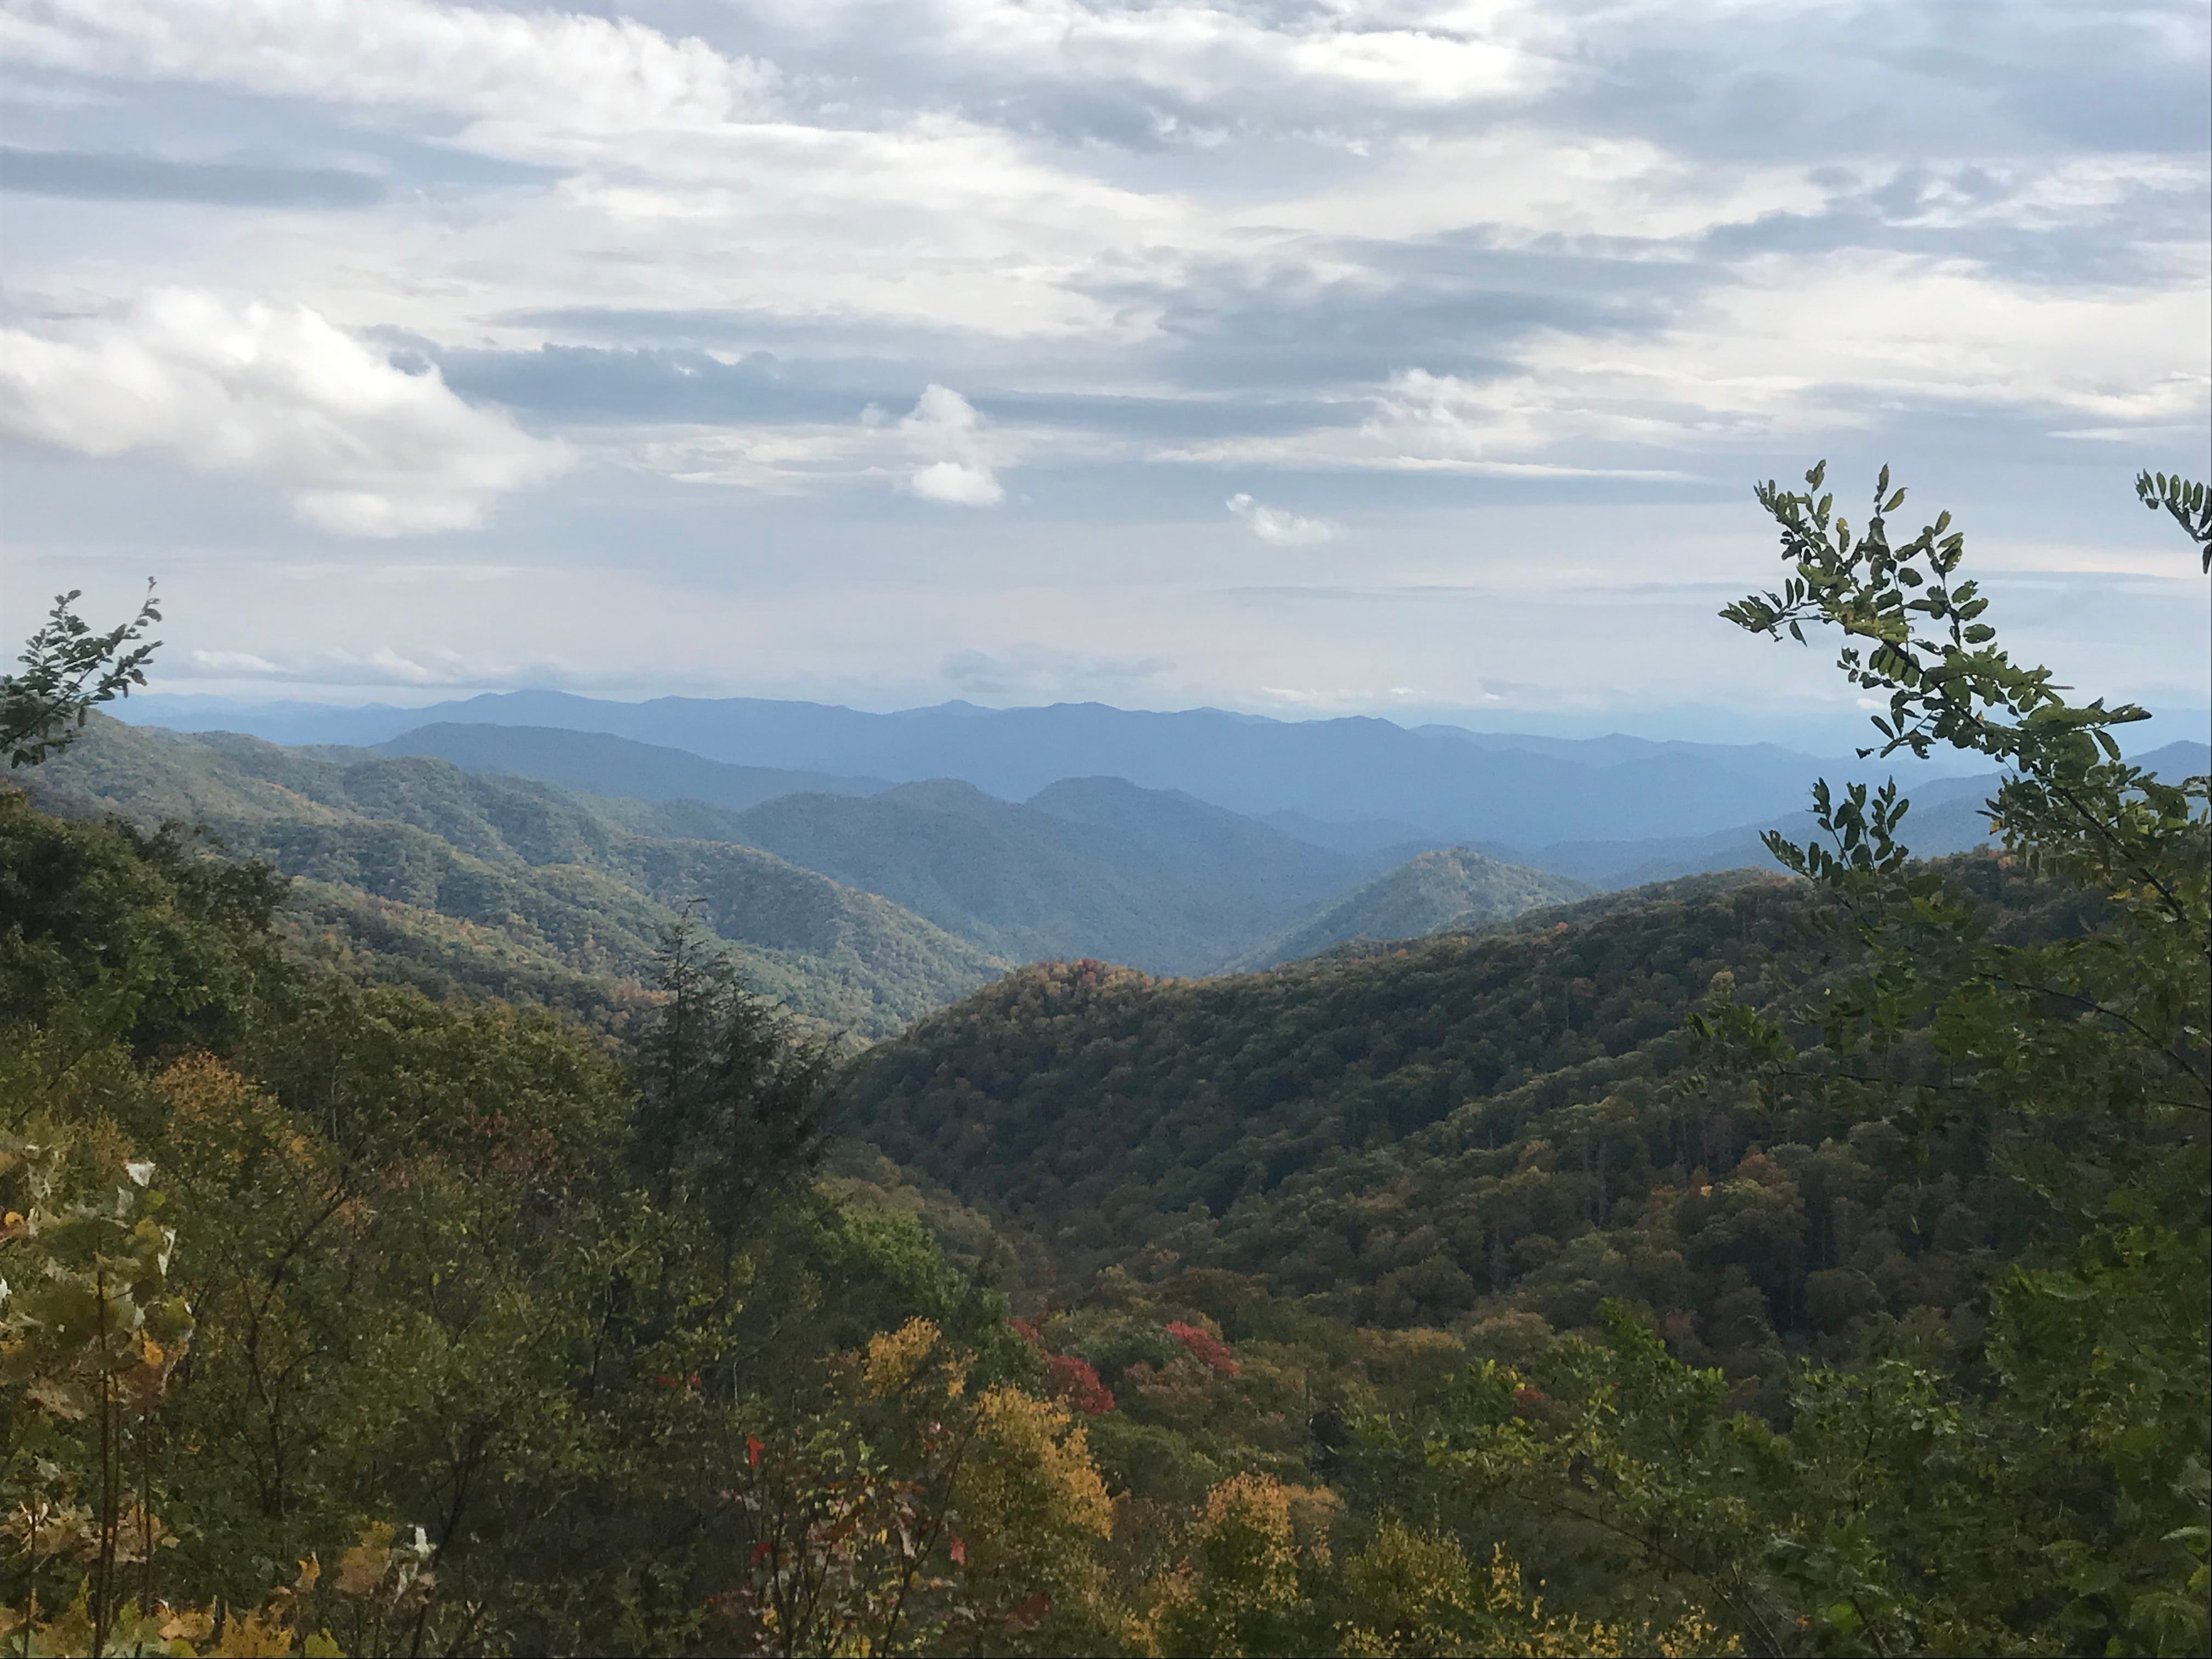 Smokey Mountain views are abundant as you travel the parkway...or in this case meander up to Clingman's Dome (until the heavy cloud cover rolls in)